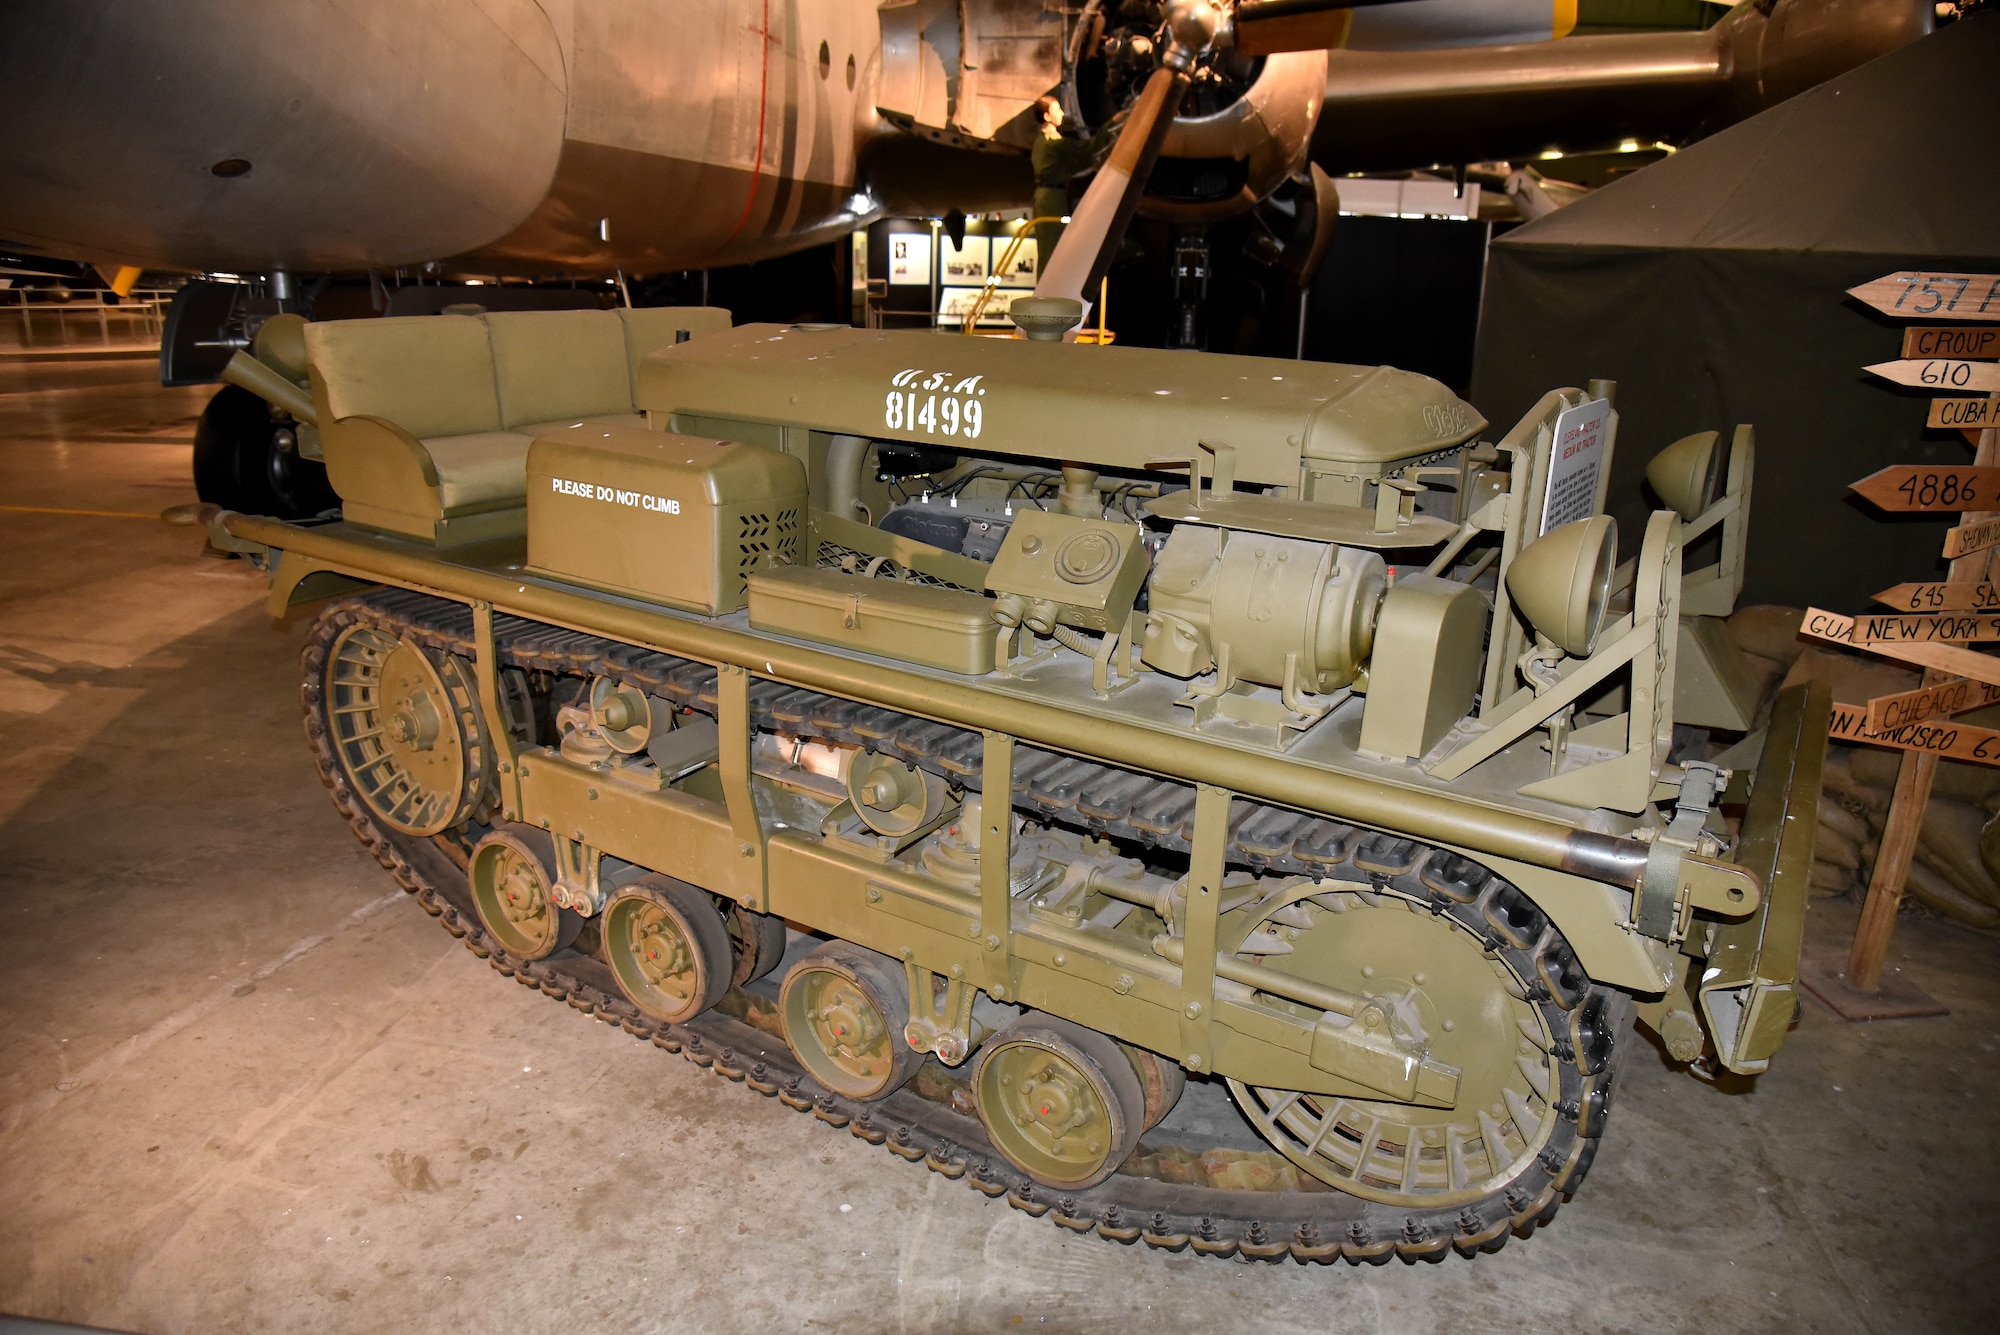 DAYTON, Ohio - Cleveland Tractor Co. Medium M2 Tractor on display in the Korean War Gallery at the National Museum of the U.S. Air Force. (U.S. Air Force photo by Ken LaRock)